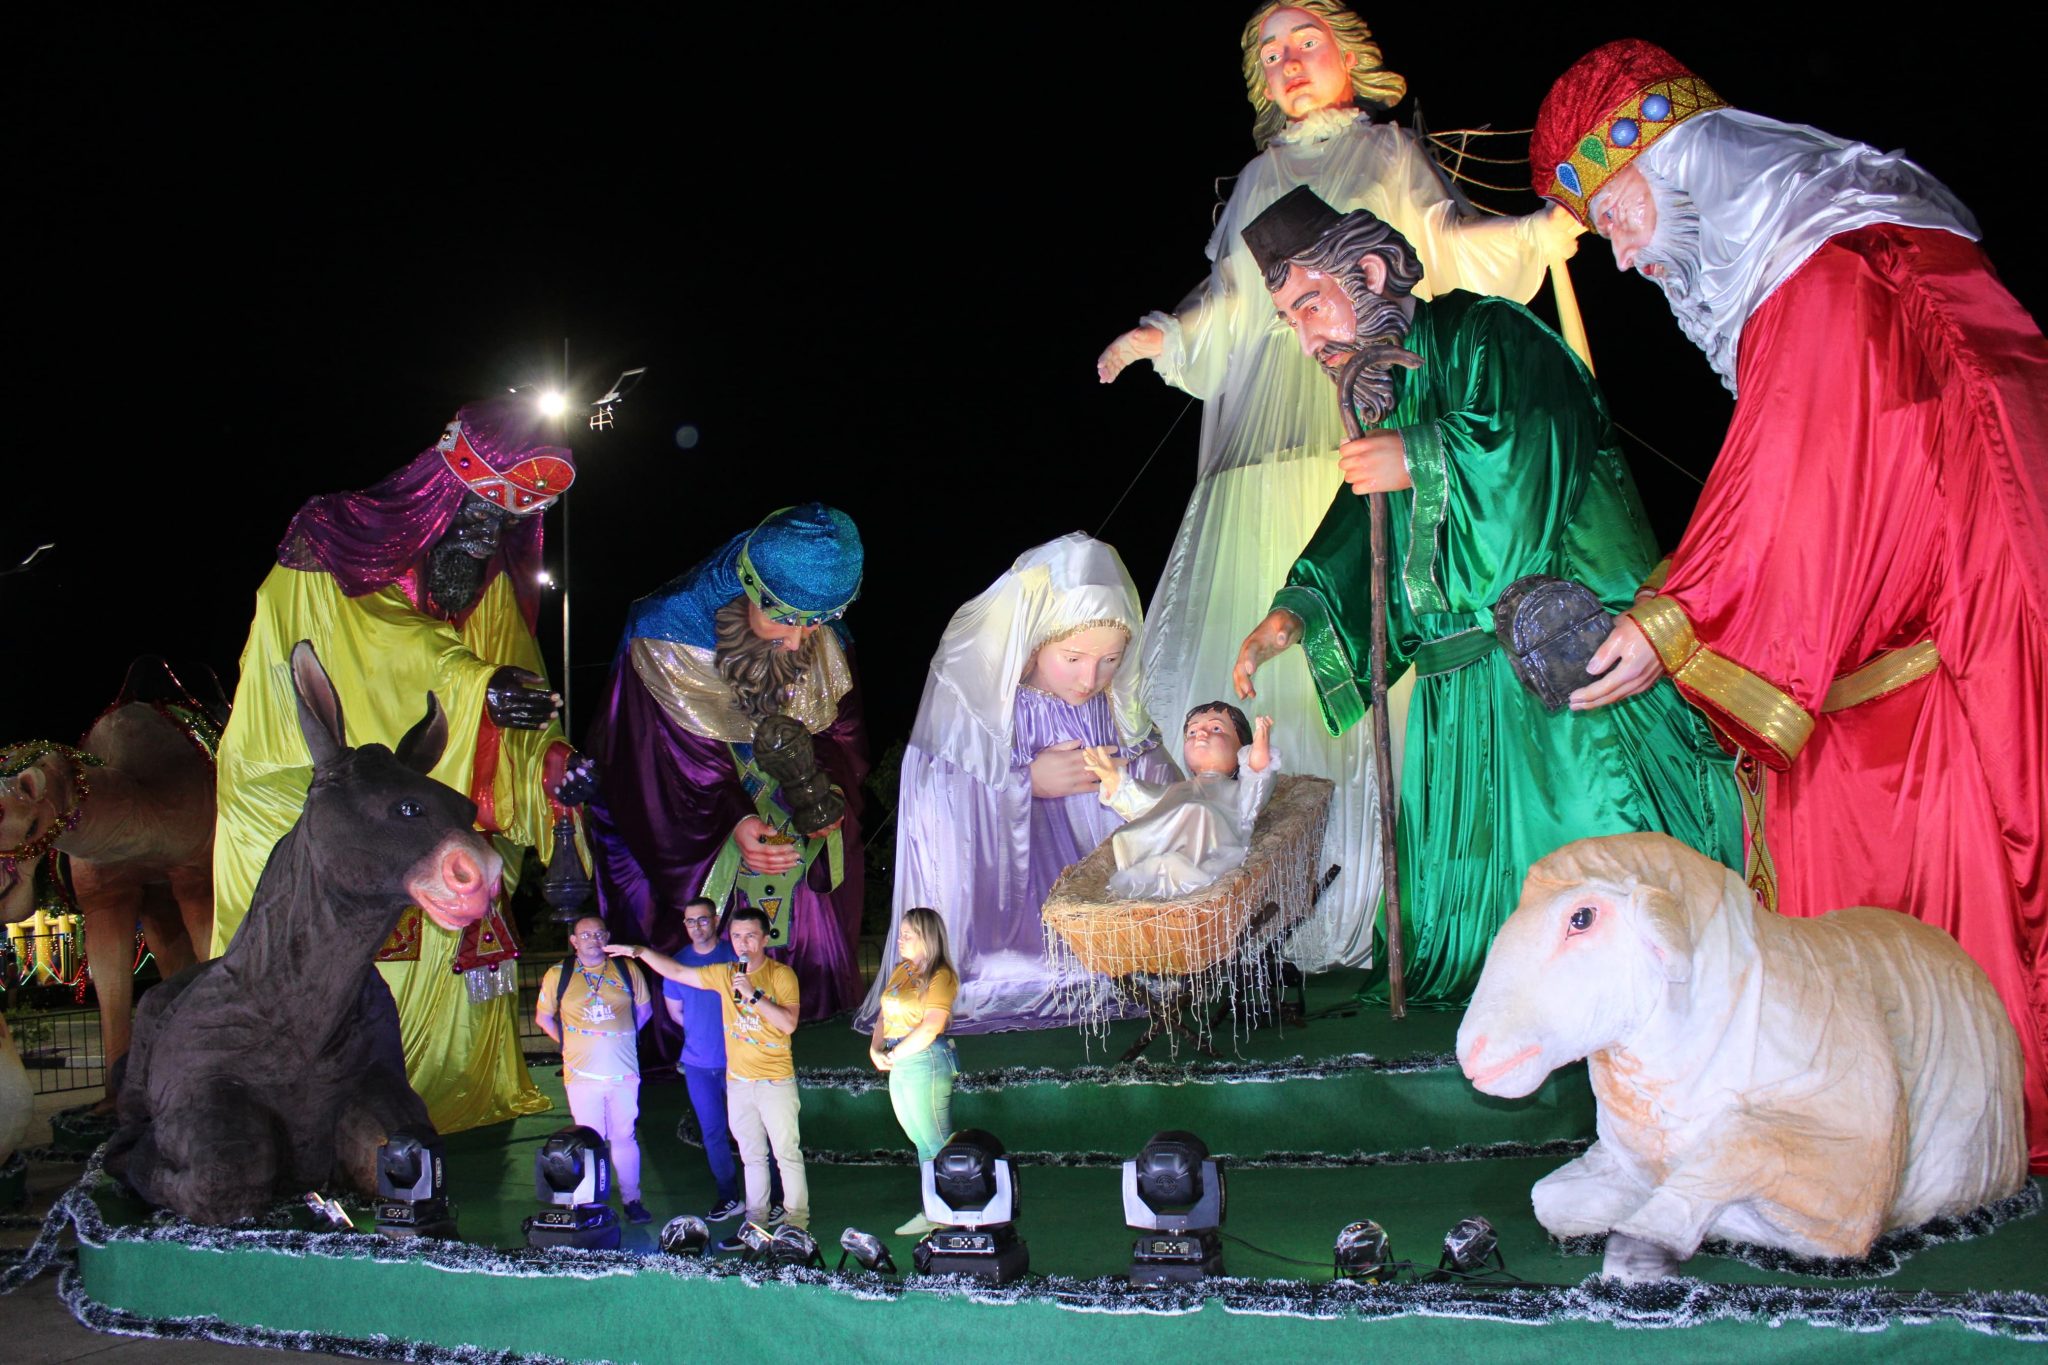 Christmas: Manaus opens the largest moving nativity scene in Brazil